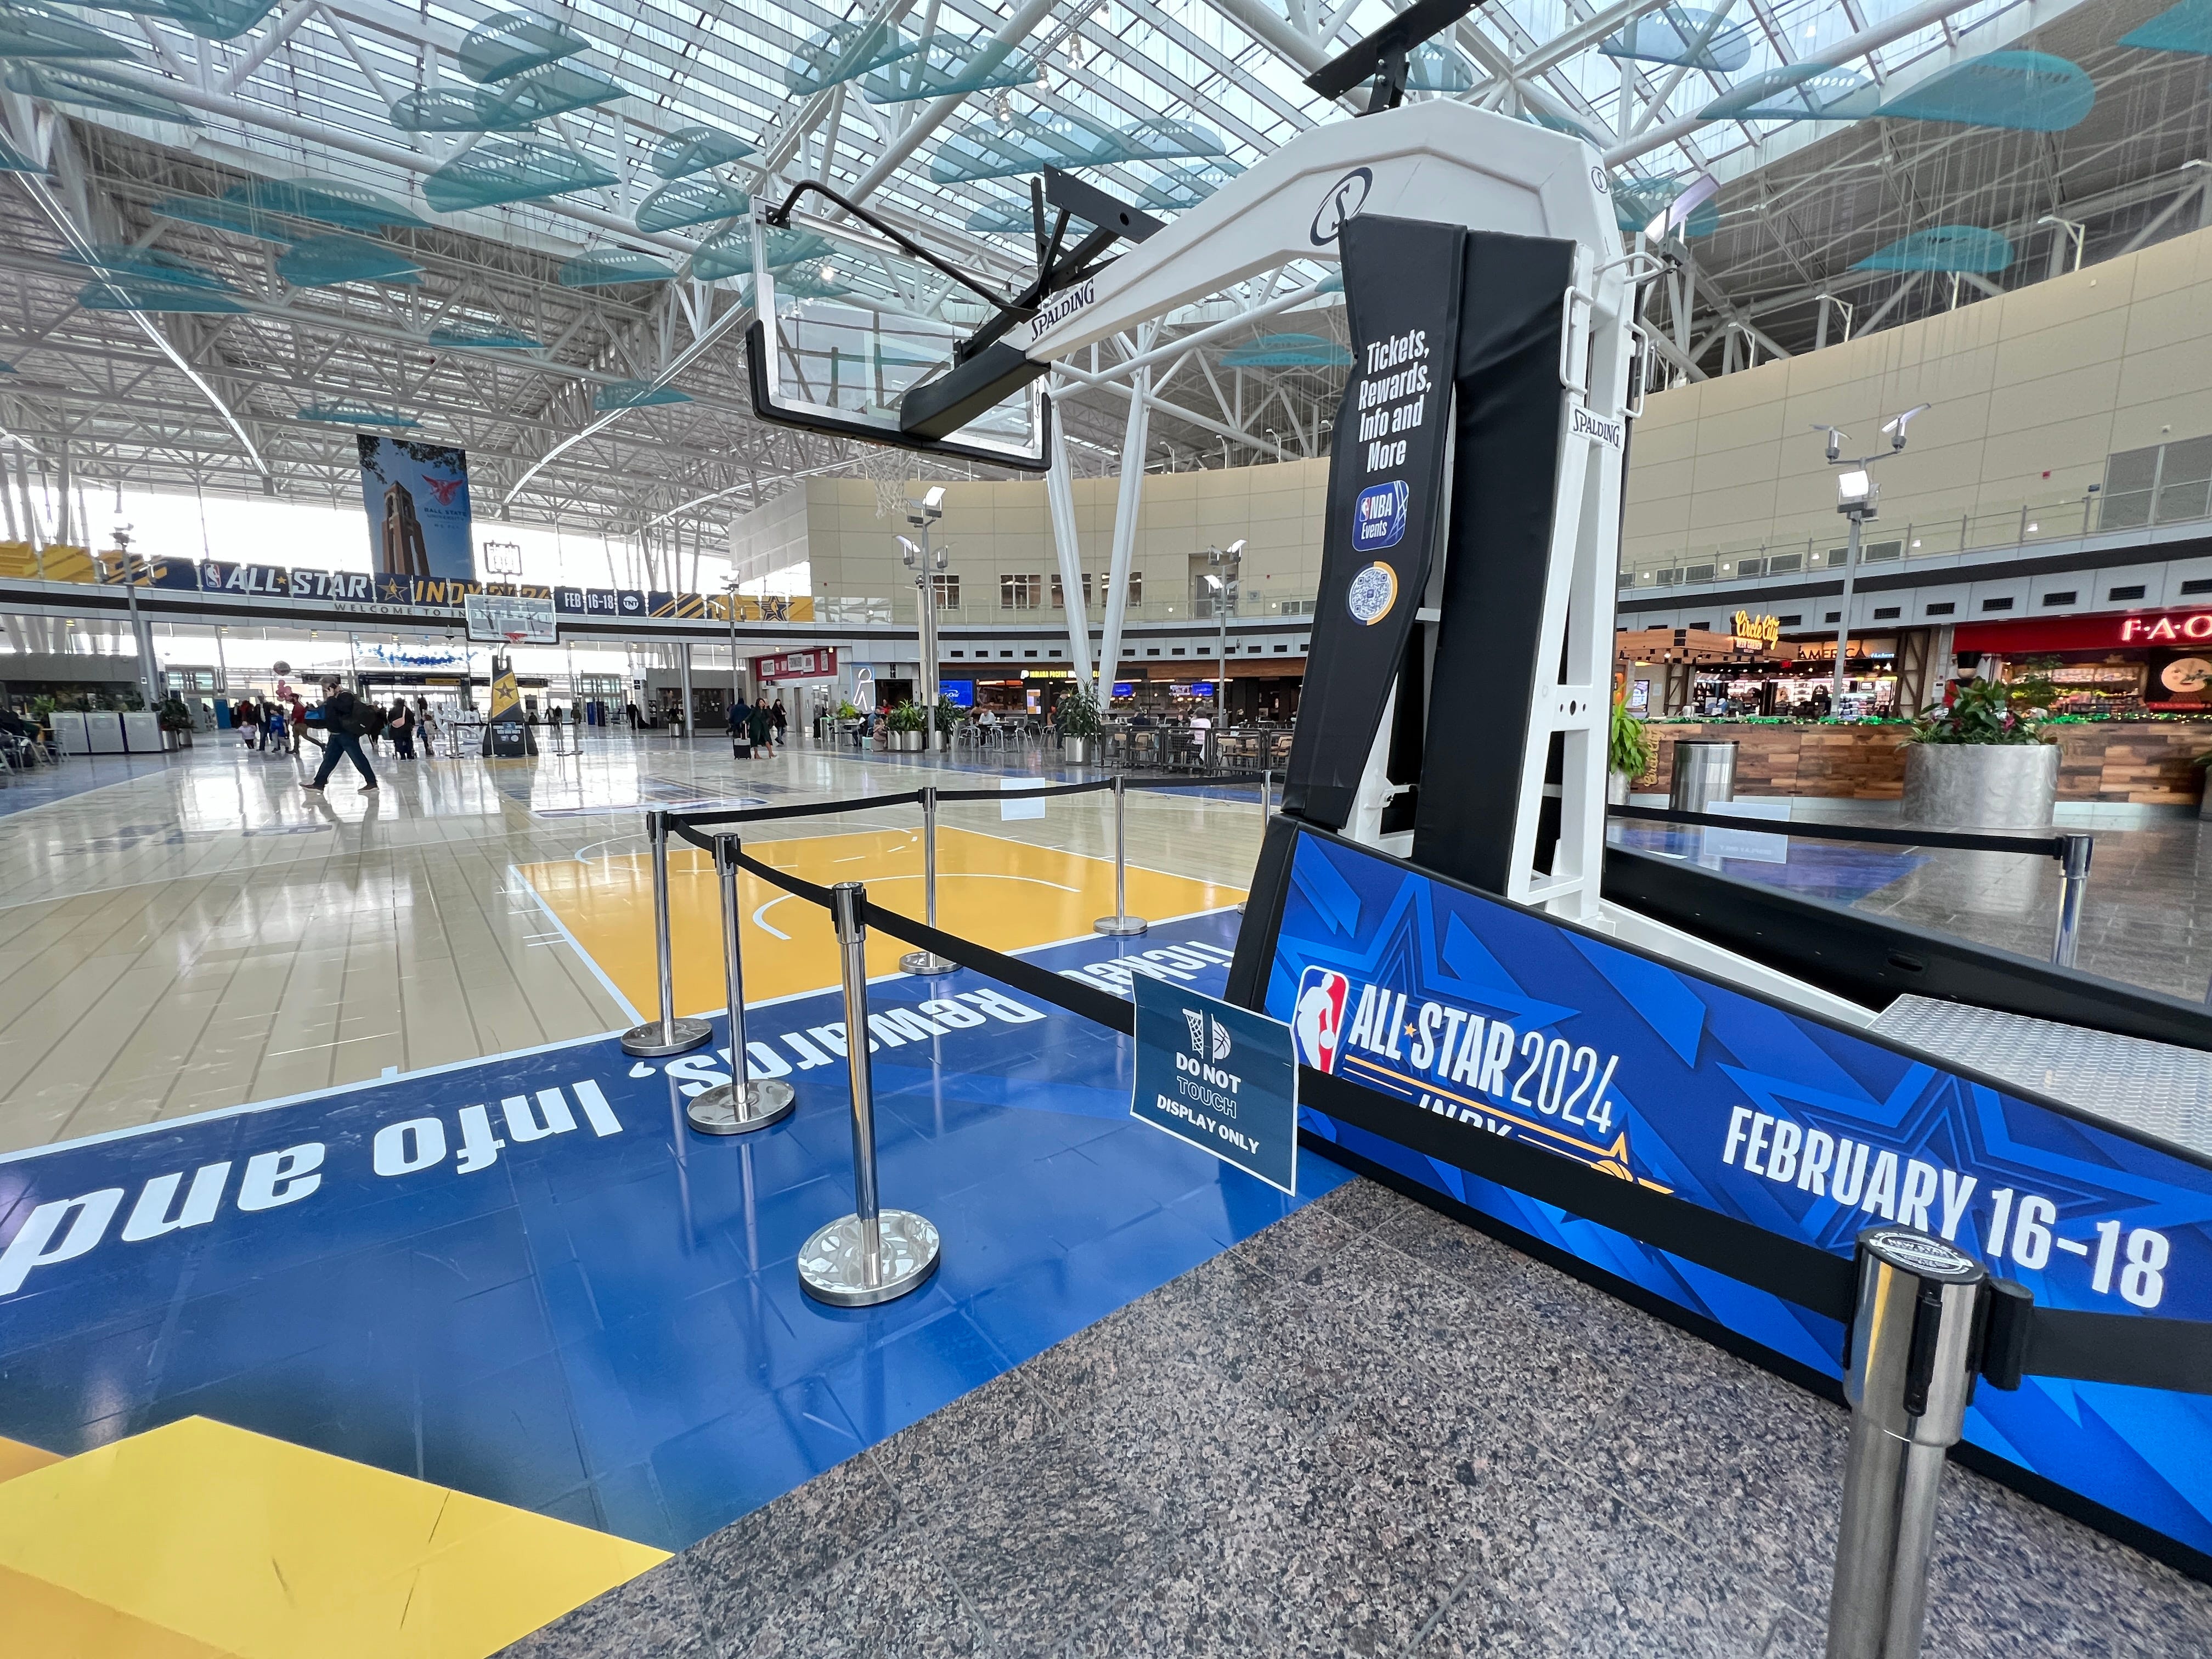 Indianapolis airport: Fans can't actually play on the basketball court